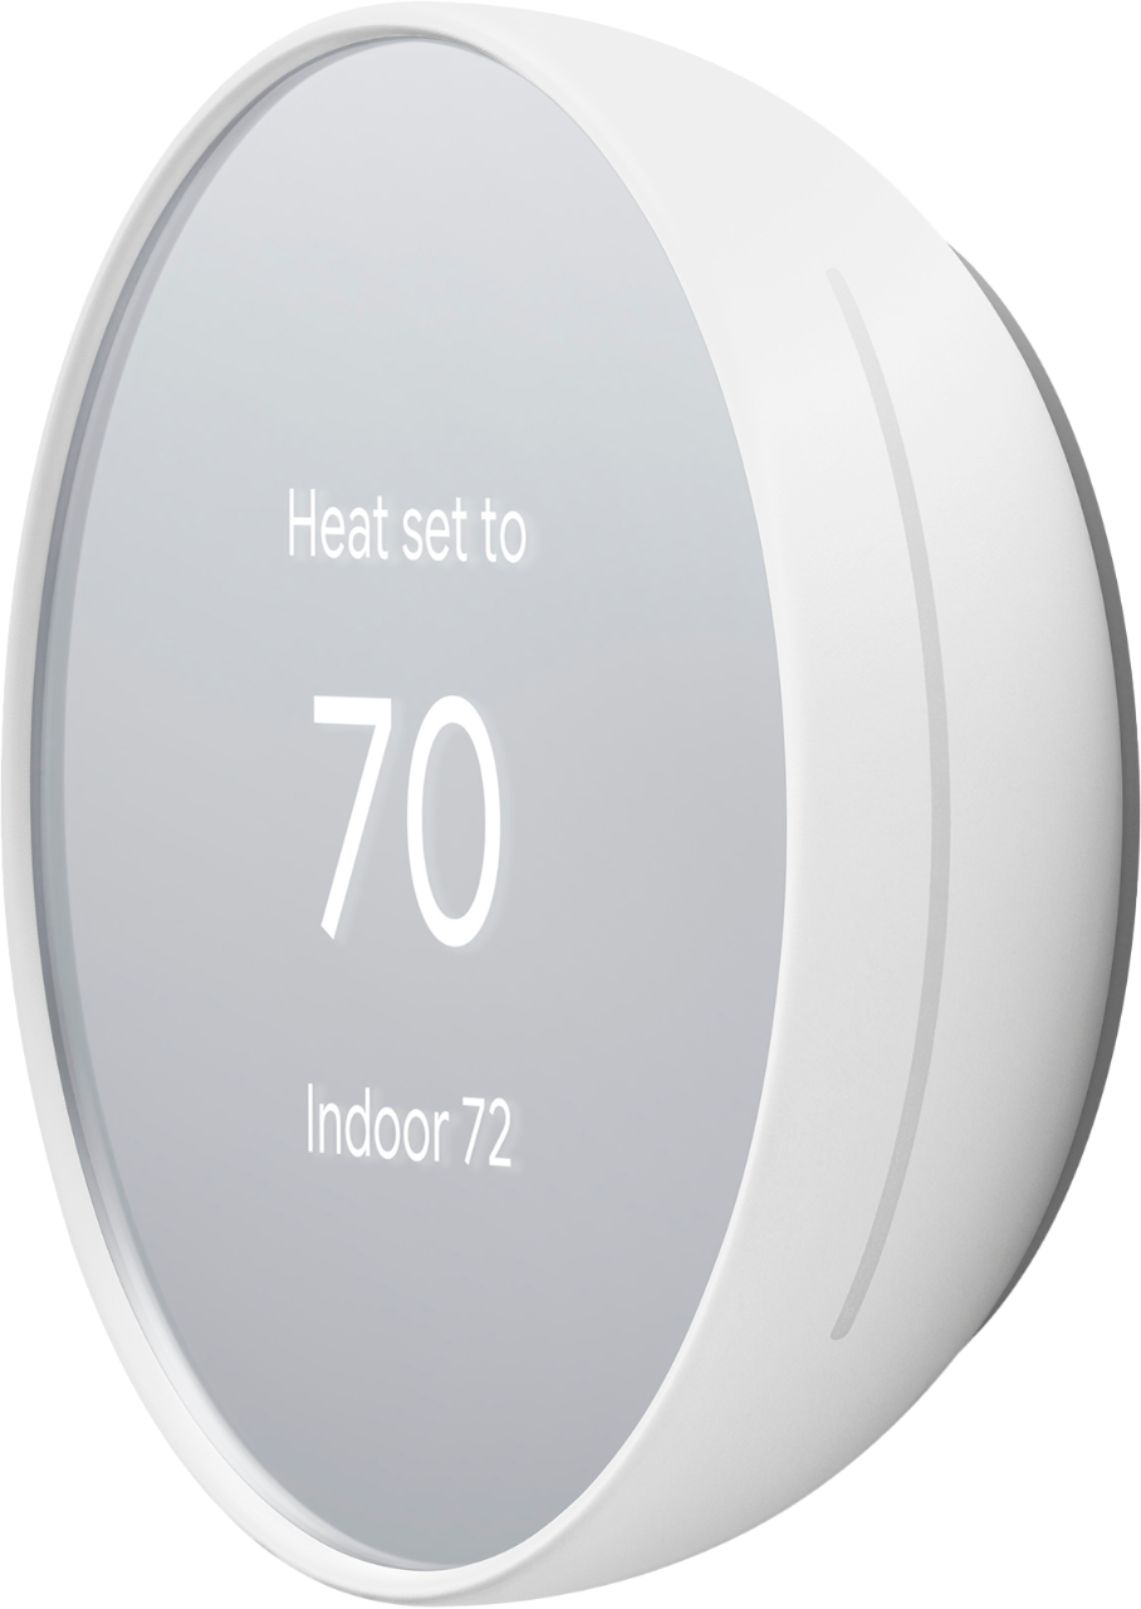 Google Nest Thermostat - Programmable Smart Thermostat for Home - Charcoal